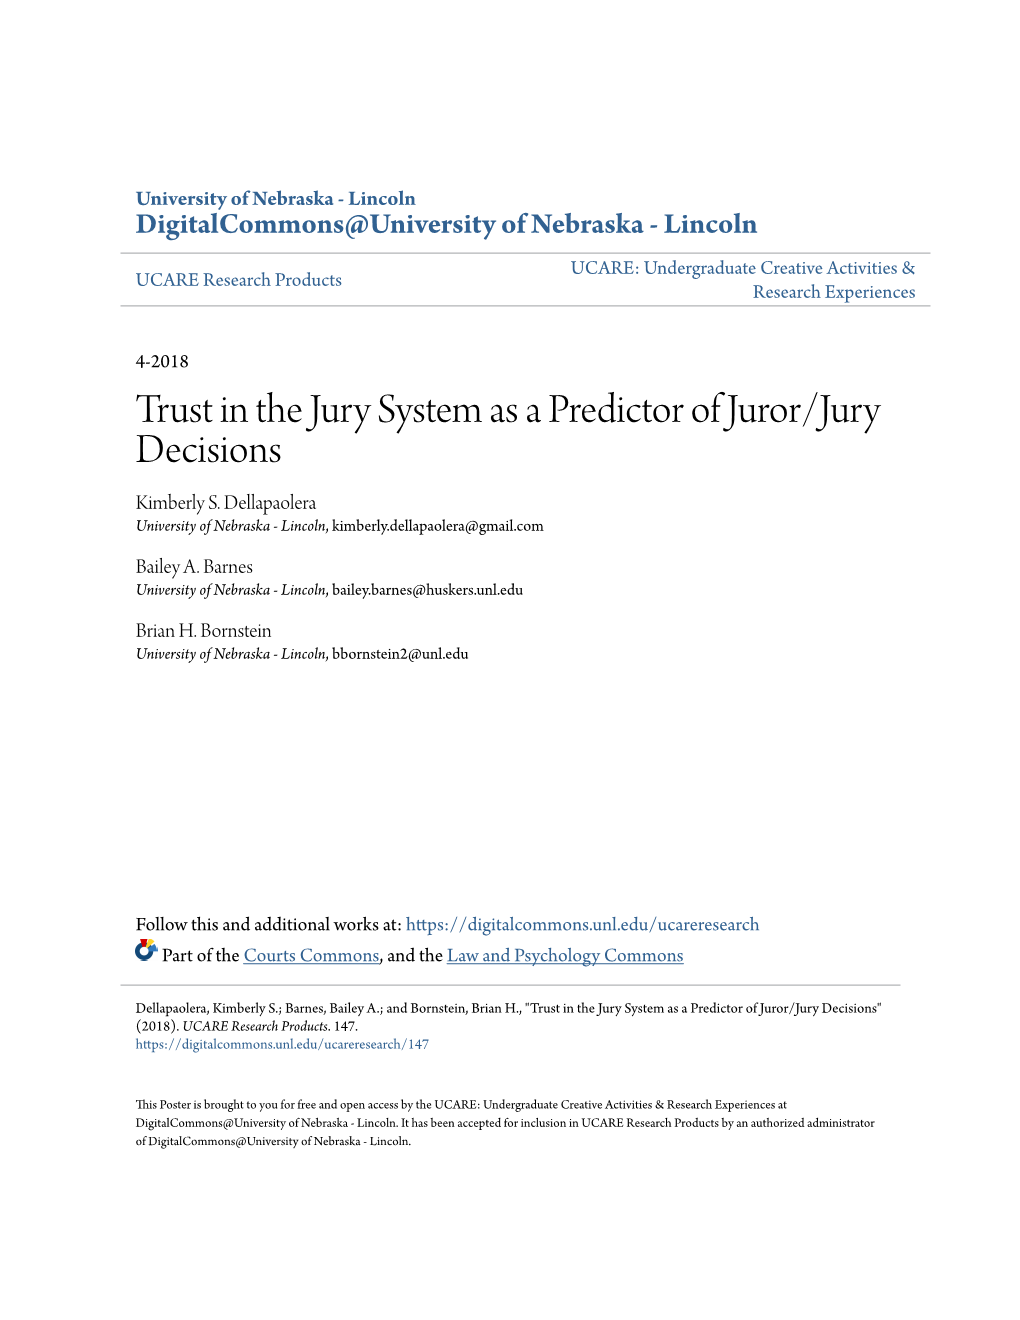 Trust in the Jury System As a Predictor of Juror/Jury Decisions Kimberly S